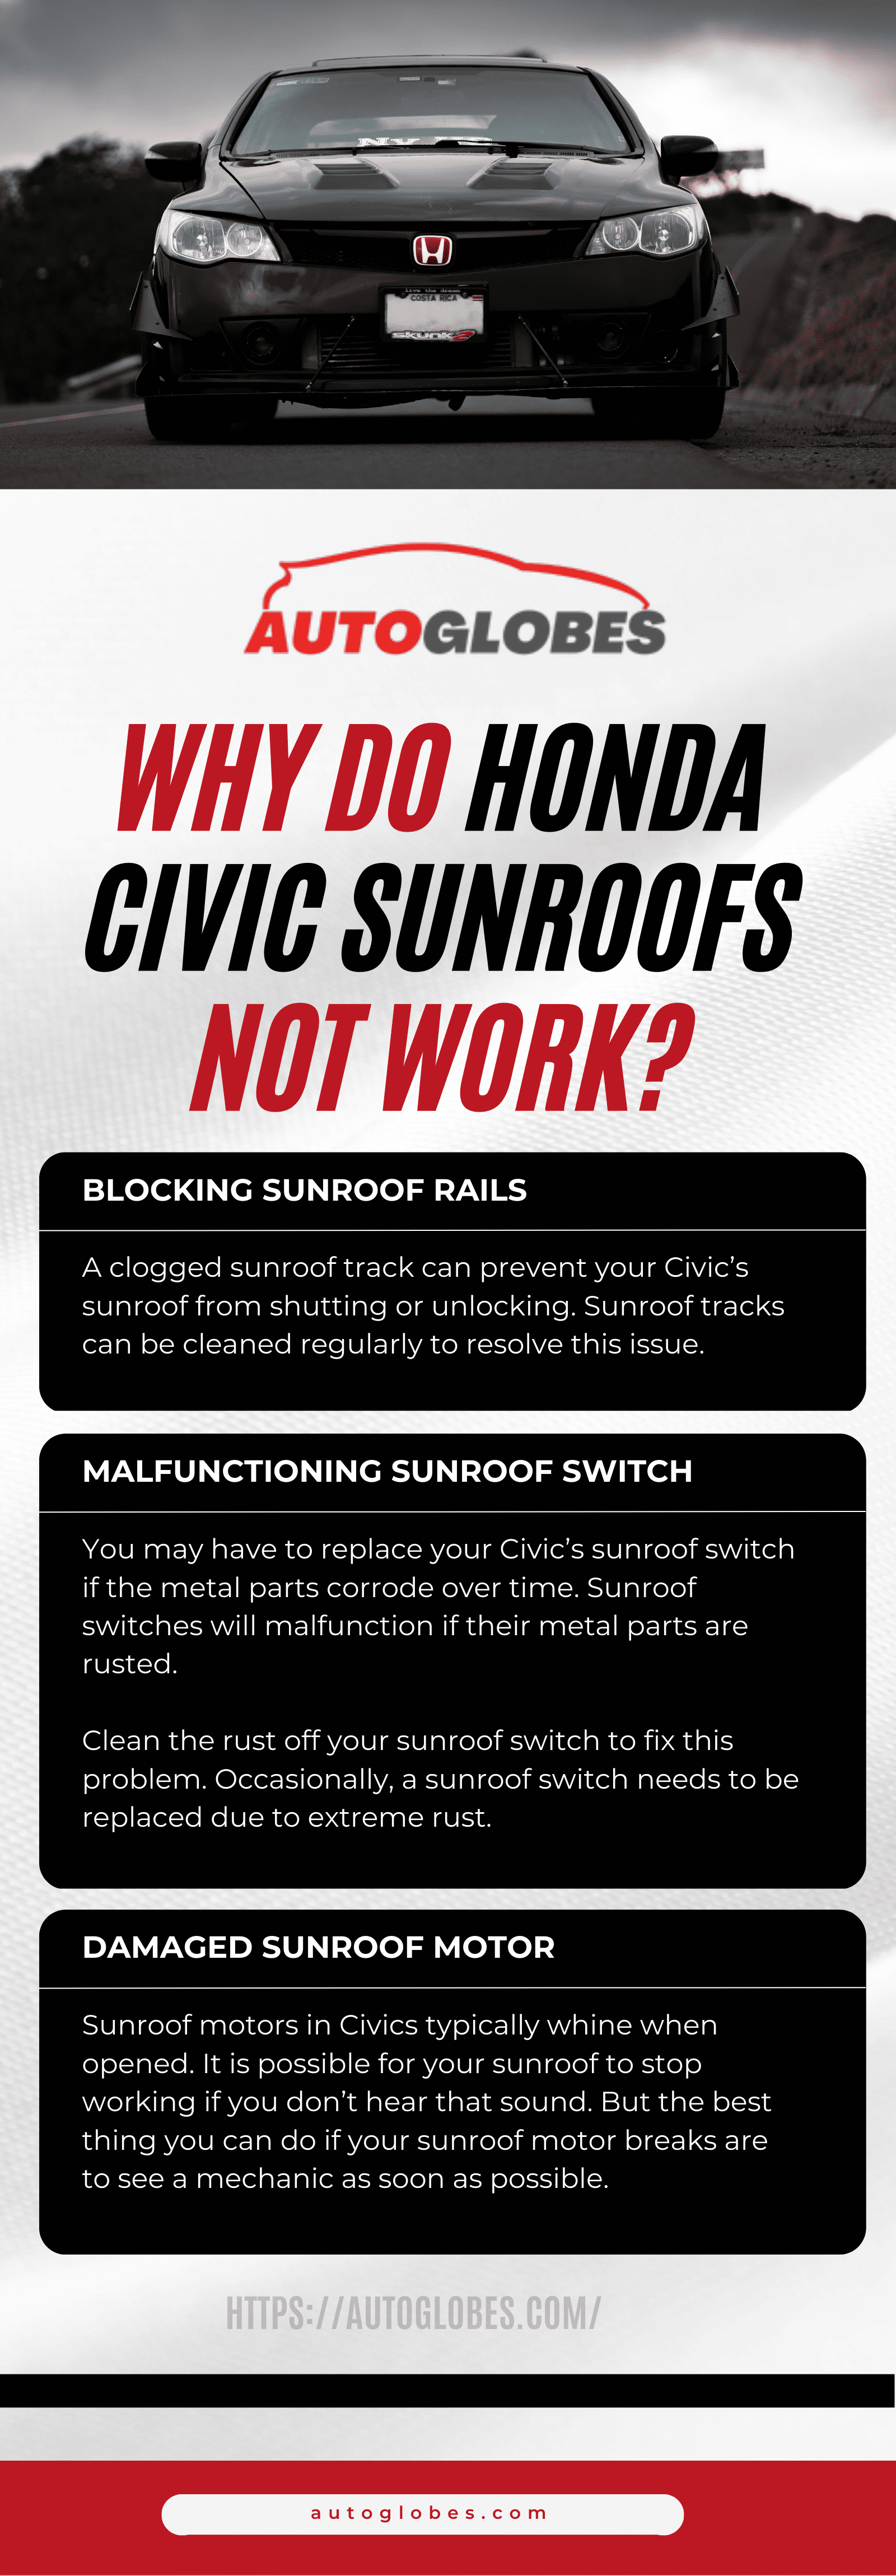 Why do Honda Civic sunroofs not work infographic